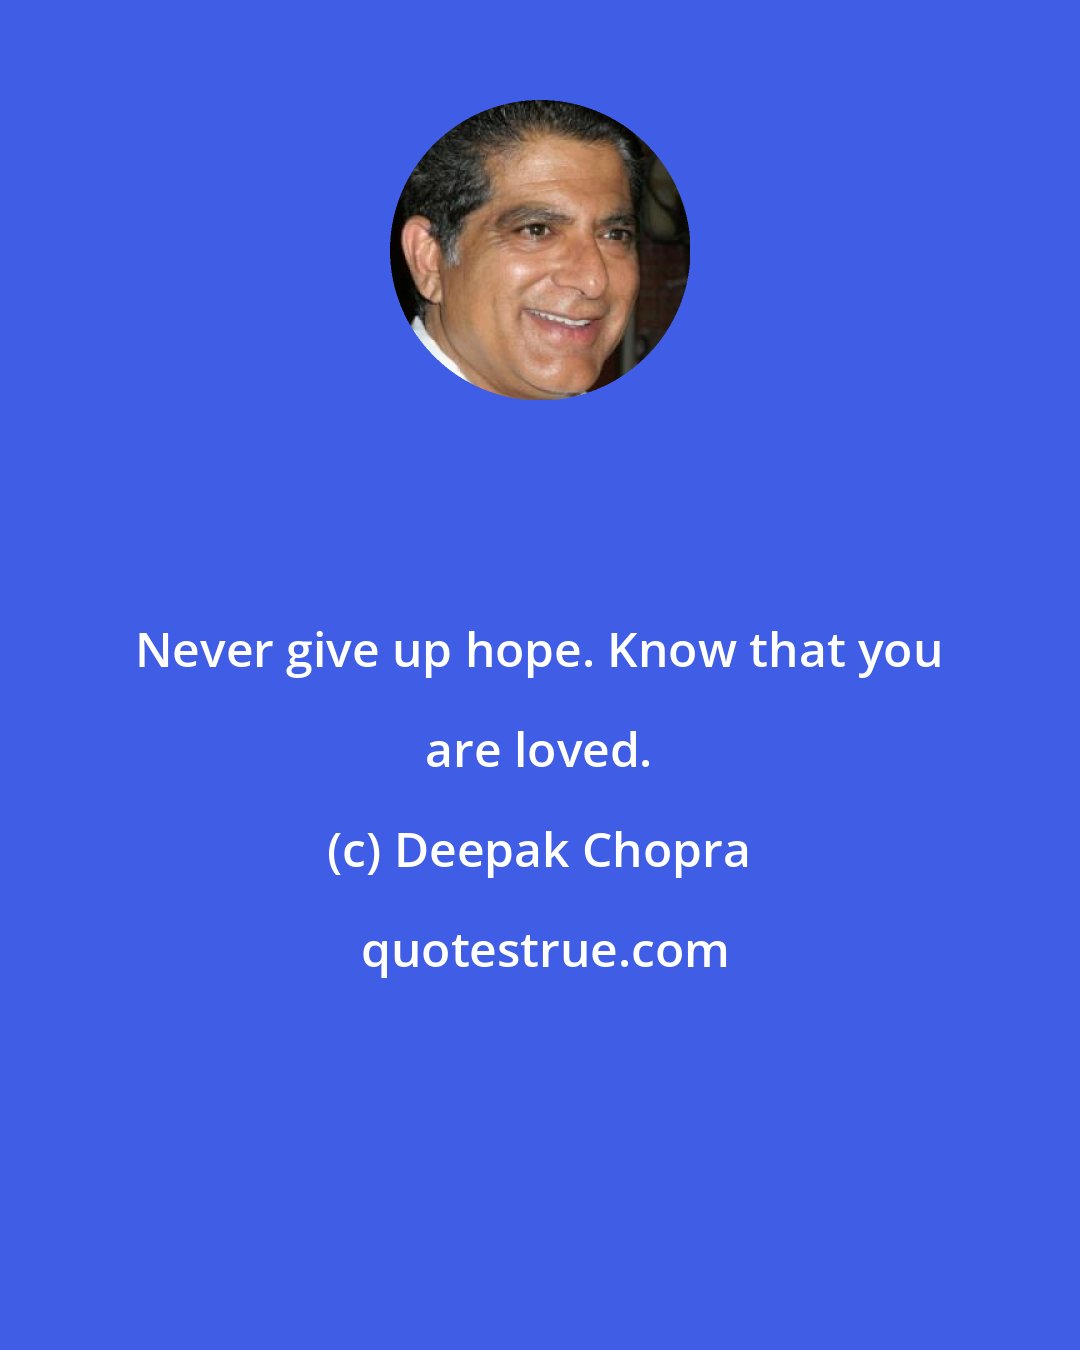 Deepak Chopra: Never give up hope. Know that you are loved.